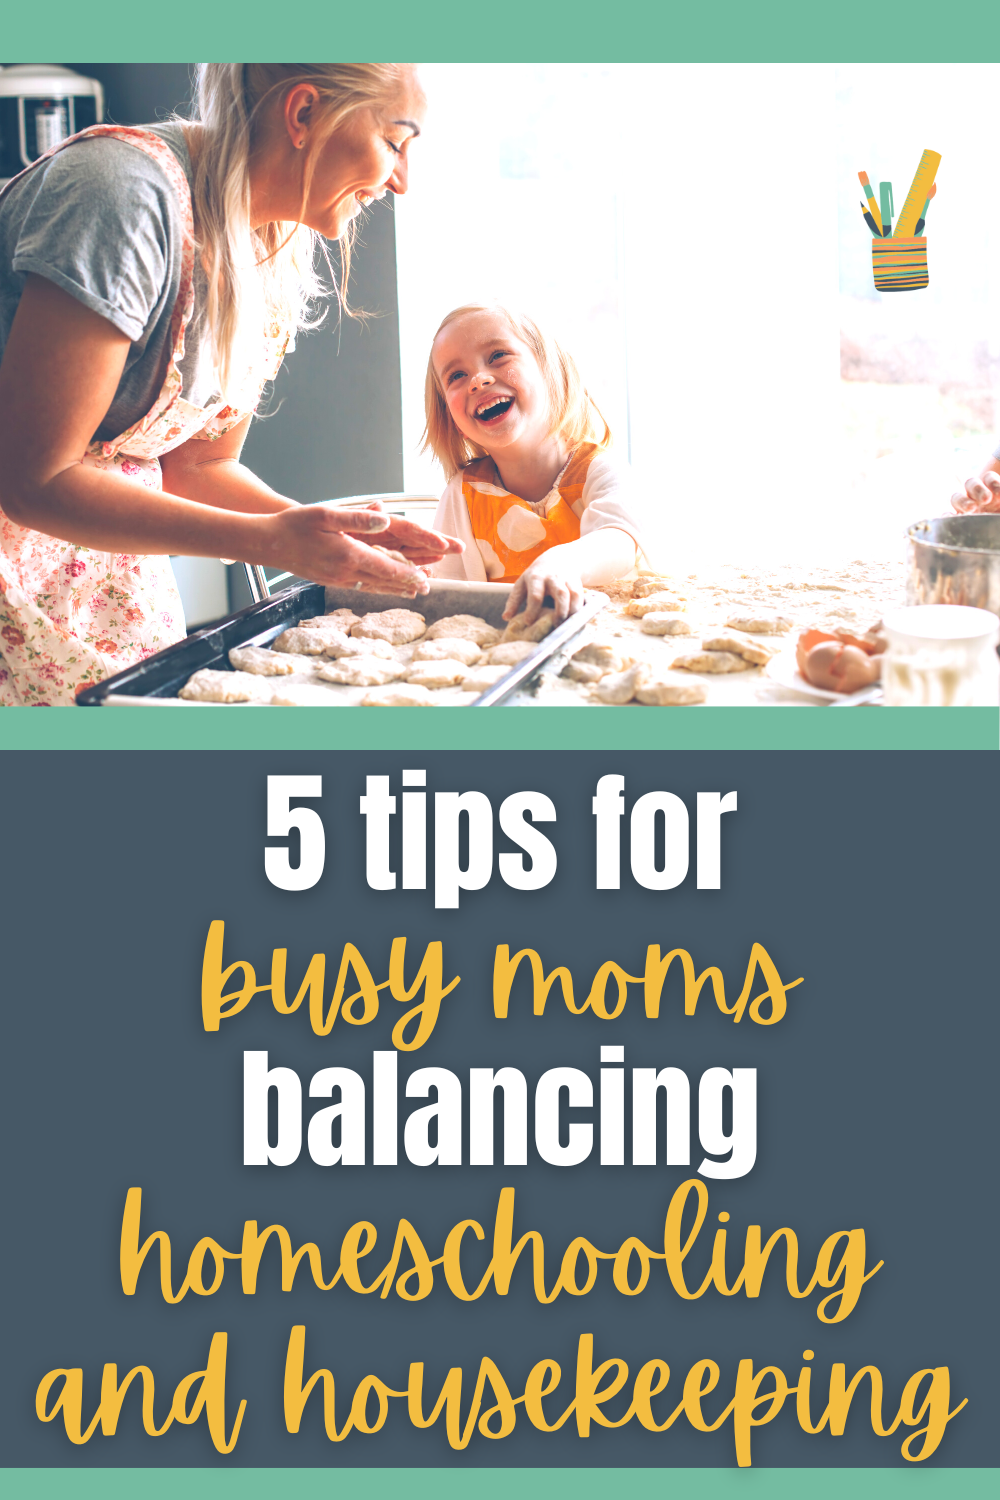 Tips for Busy Moms Balancing Homeschooling and Housekeeping